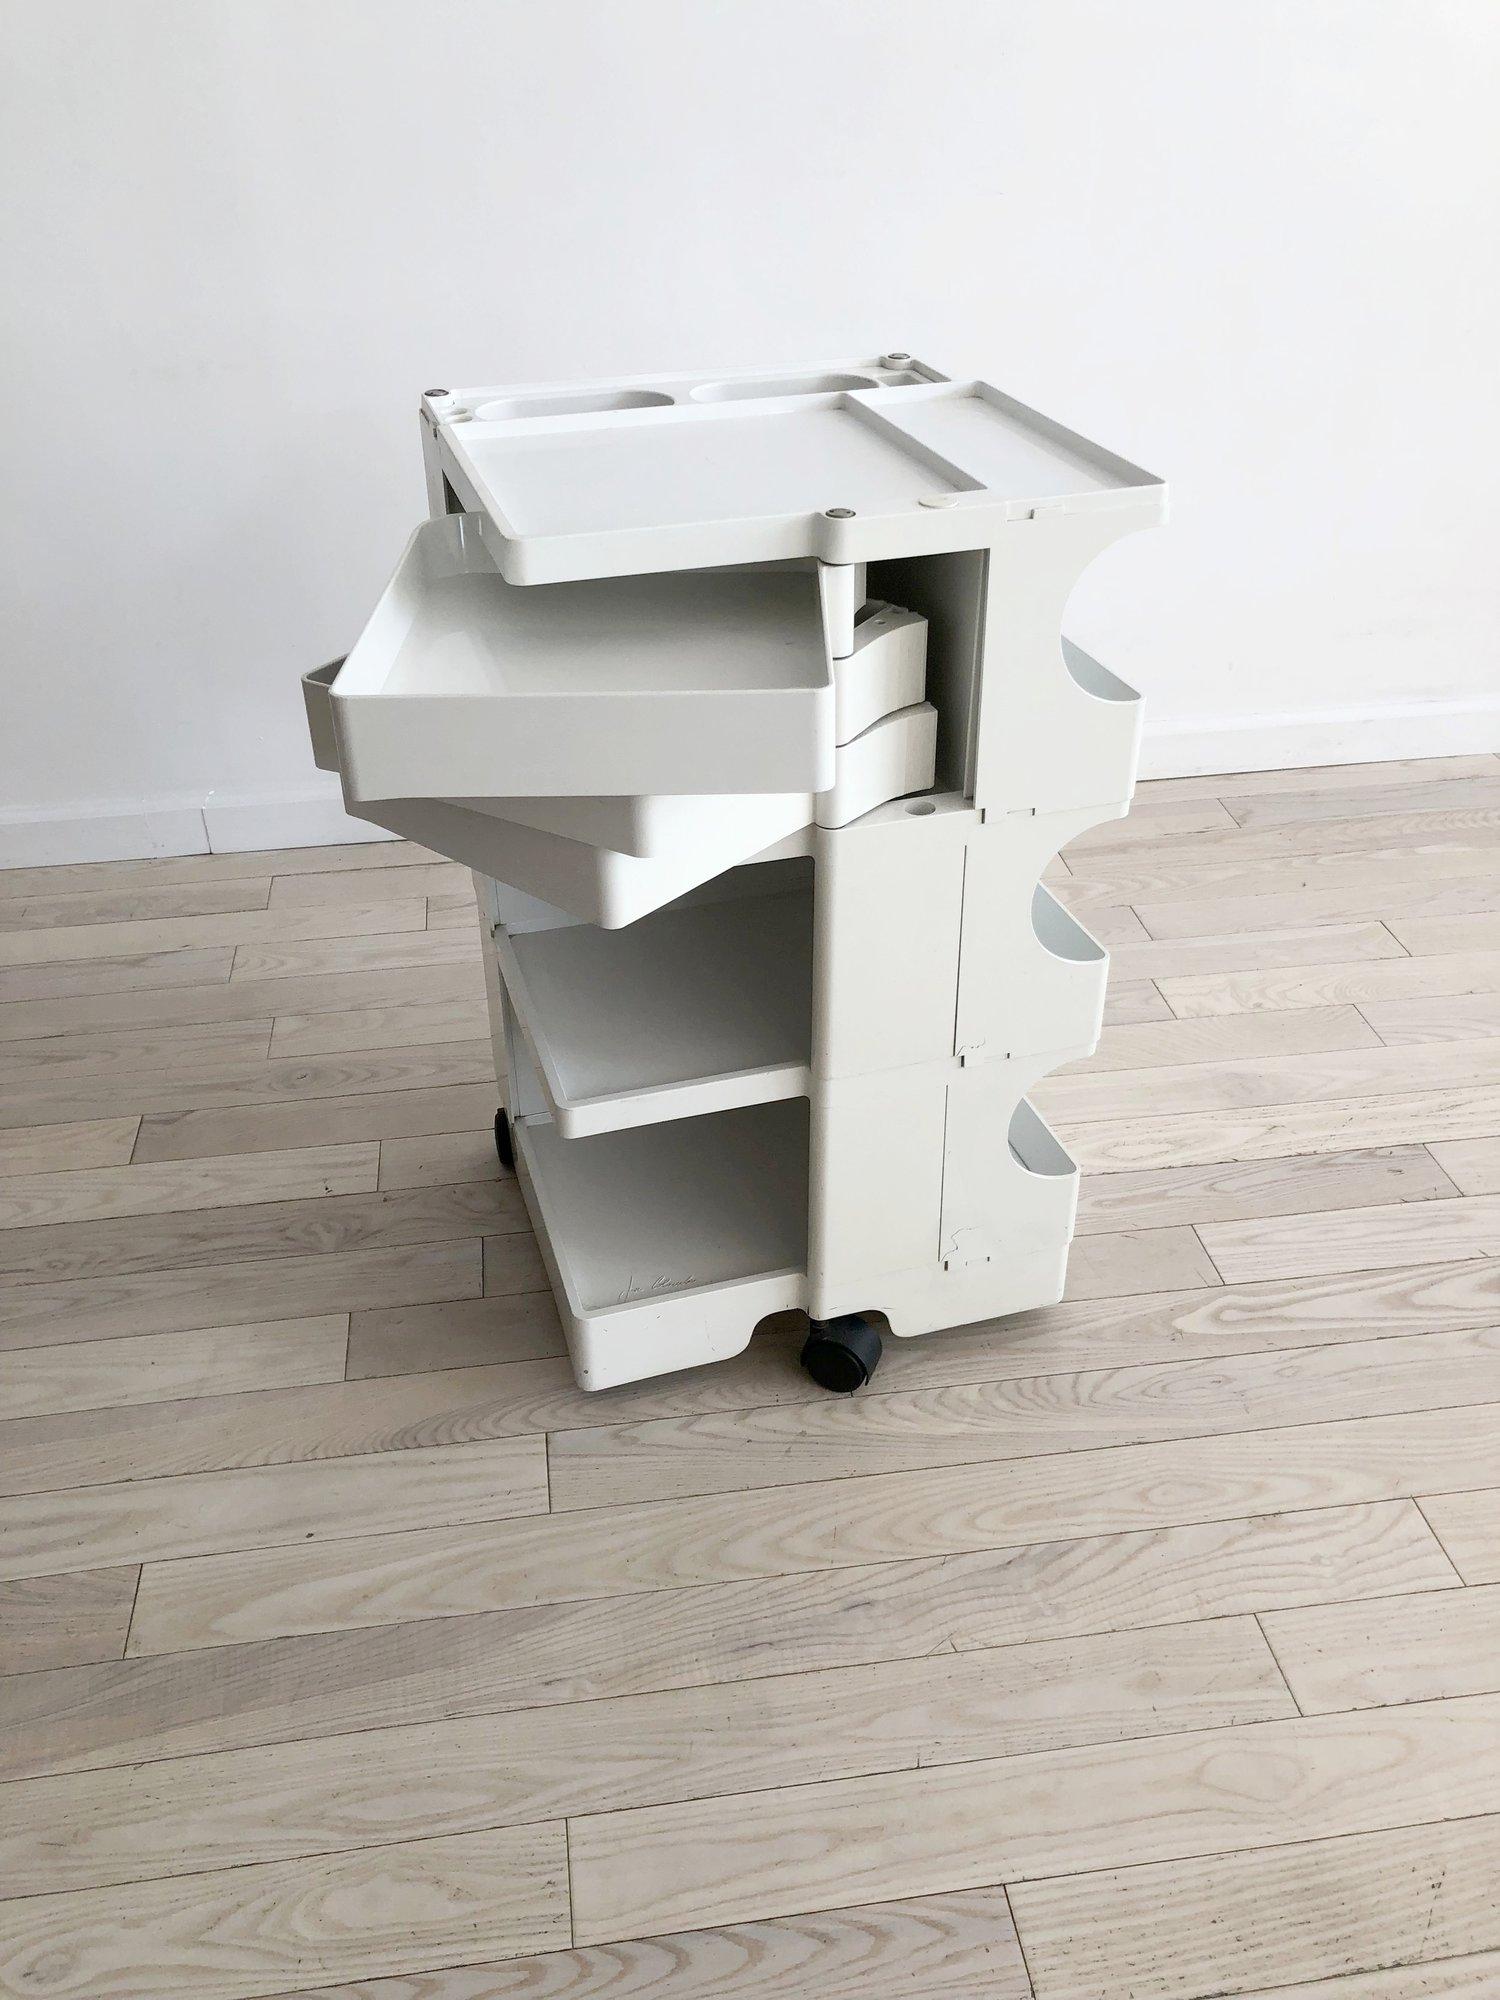 Excellent condition white, signed Joe Colombo Boby Trolley cart. Awesome storage unit in the bathroom, studio, bar cart. It is made out of injections-molded ABS plastic. The white is still white and not yellowed from age. Super clean, very minor